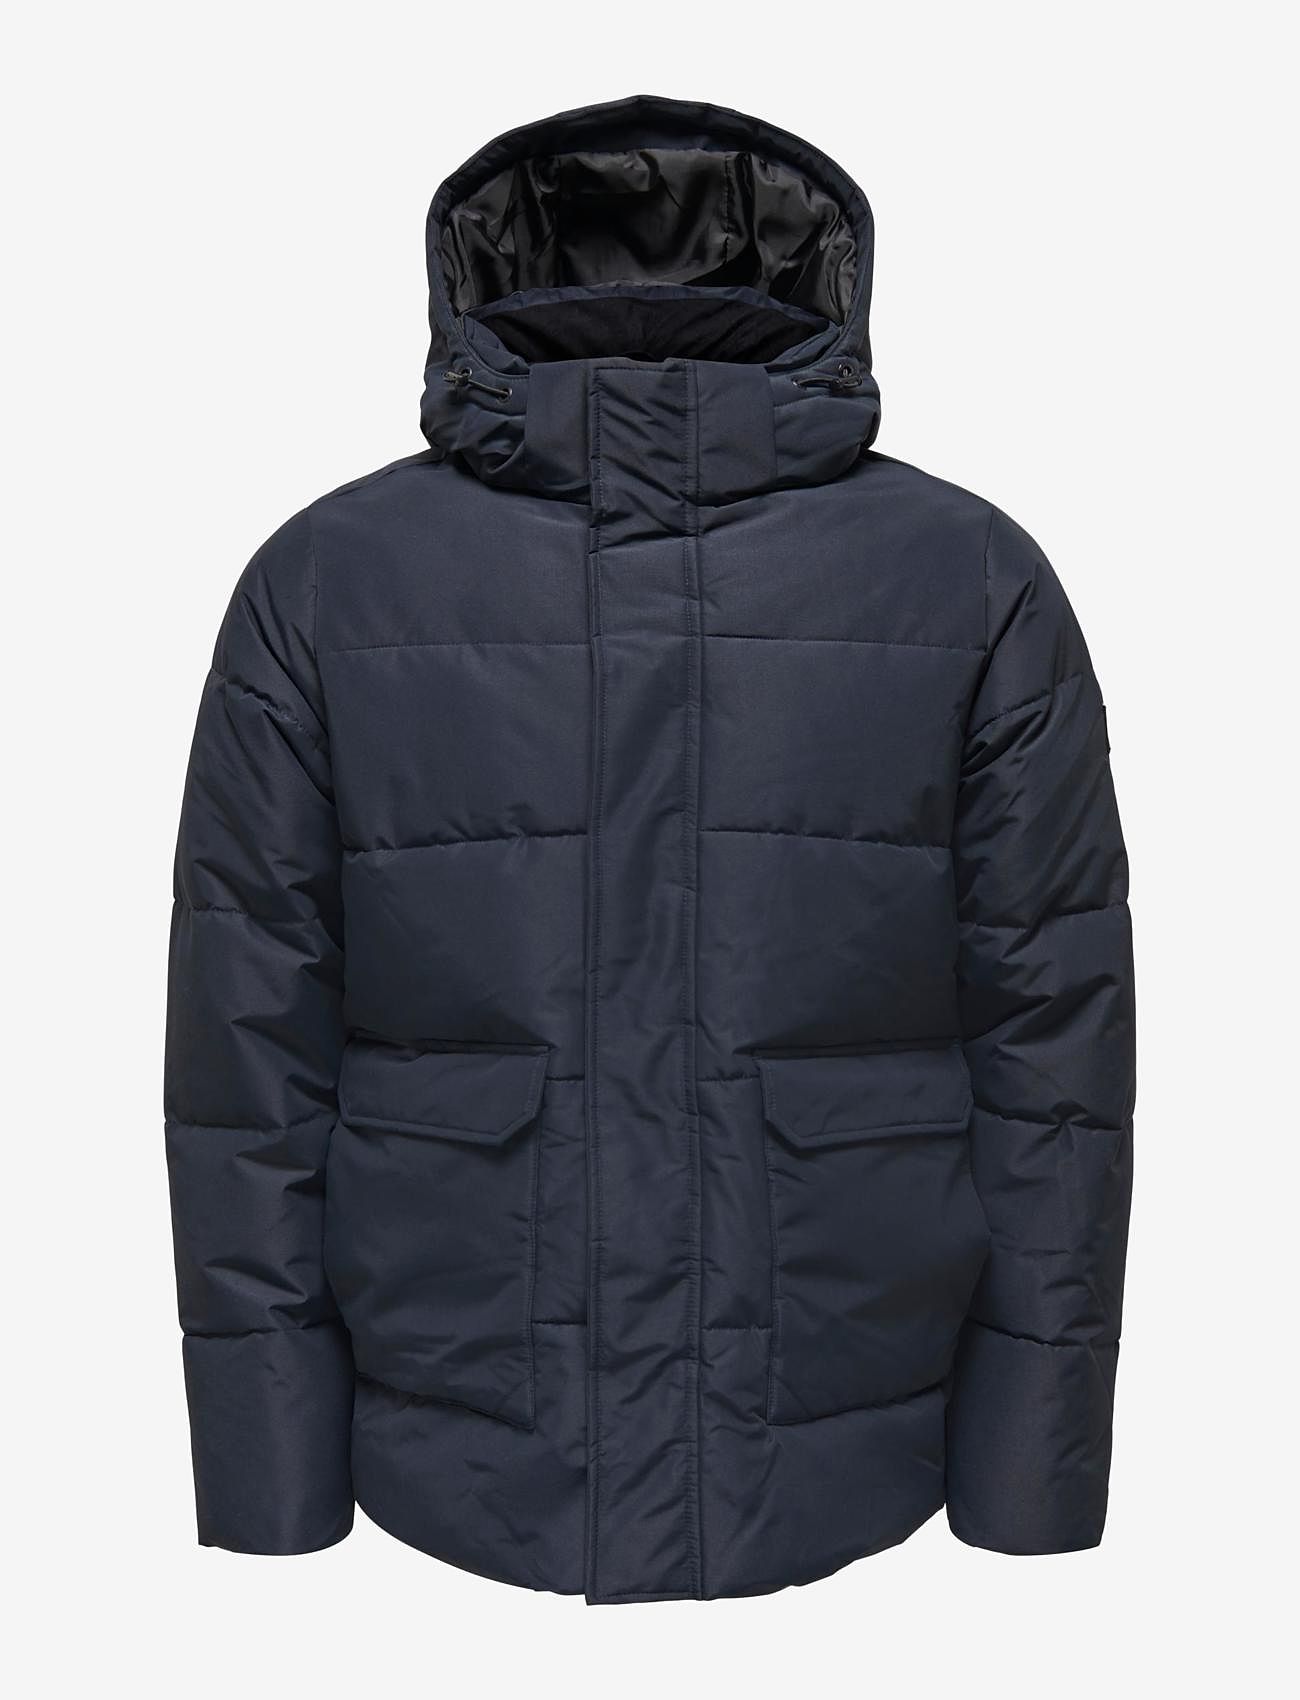 ONLY & SONS - ONSCARL QUILTED JACKET OTW - padded jackets - dark navy - 0